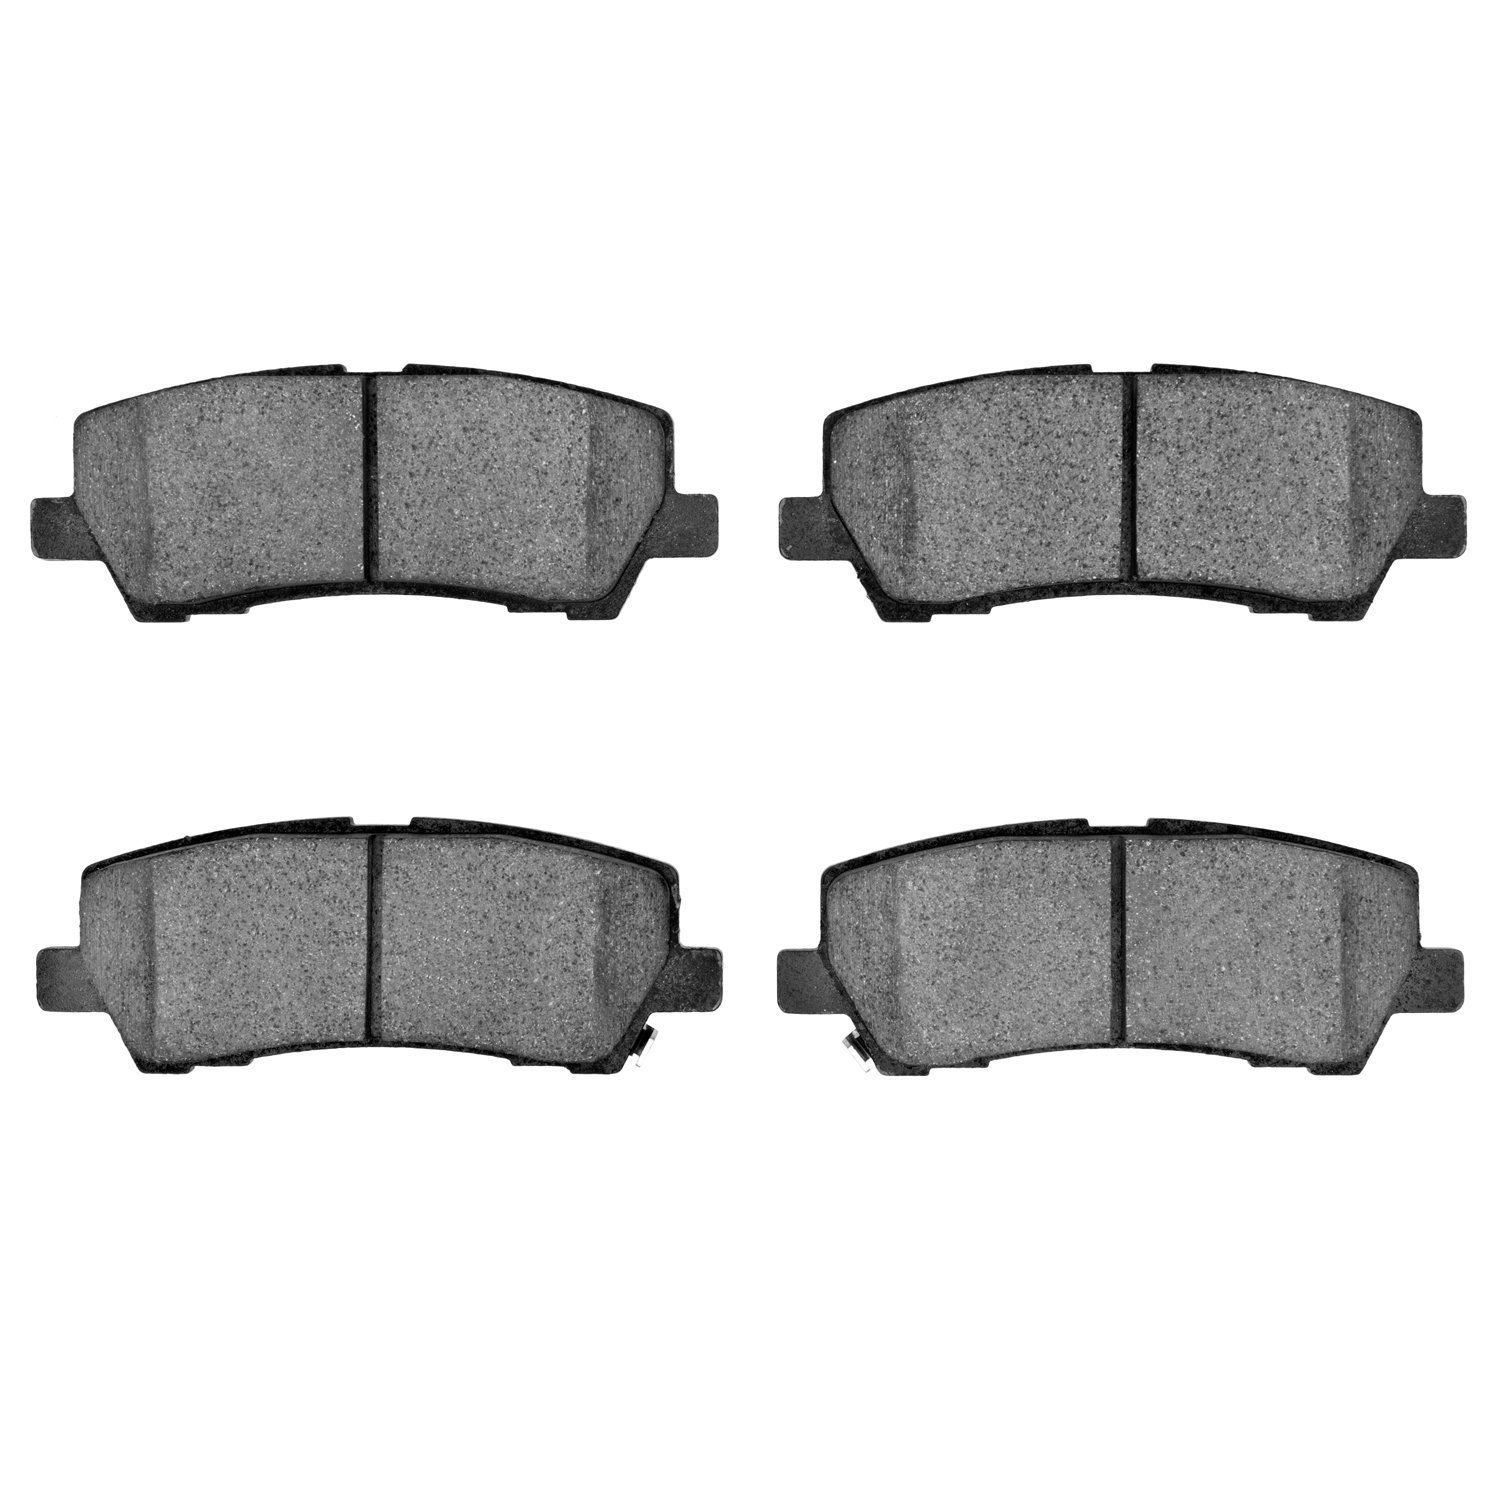 1551-1793-00 5000 Advanced Ceramic Brake Pads, Fits Select Ford/Lincoln/Mercury/Mazda, Position: Rear